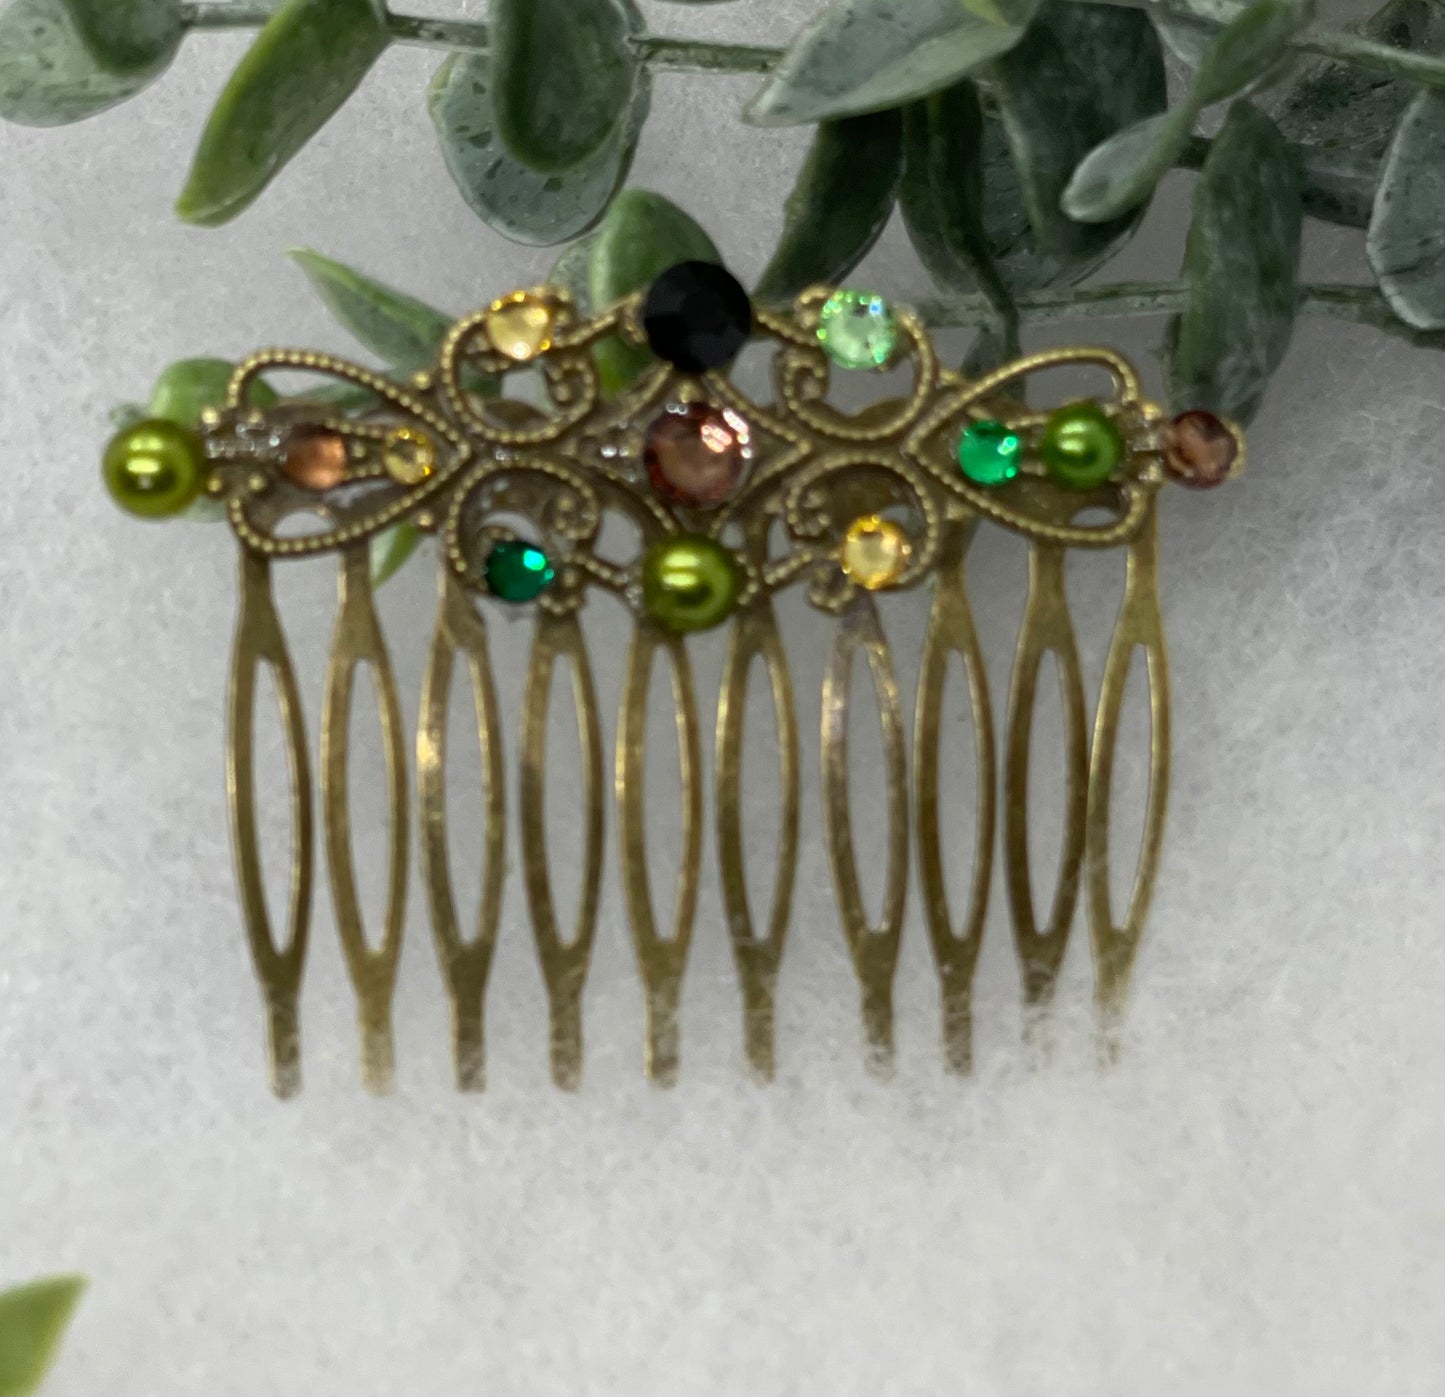 Camouflage crystal rhinestone pearl vintage style antique  hair accessories gift birthday event formal bridesmaid  2.5” Metal side Comb #531